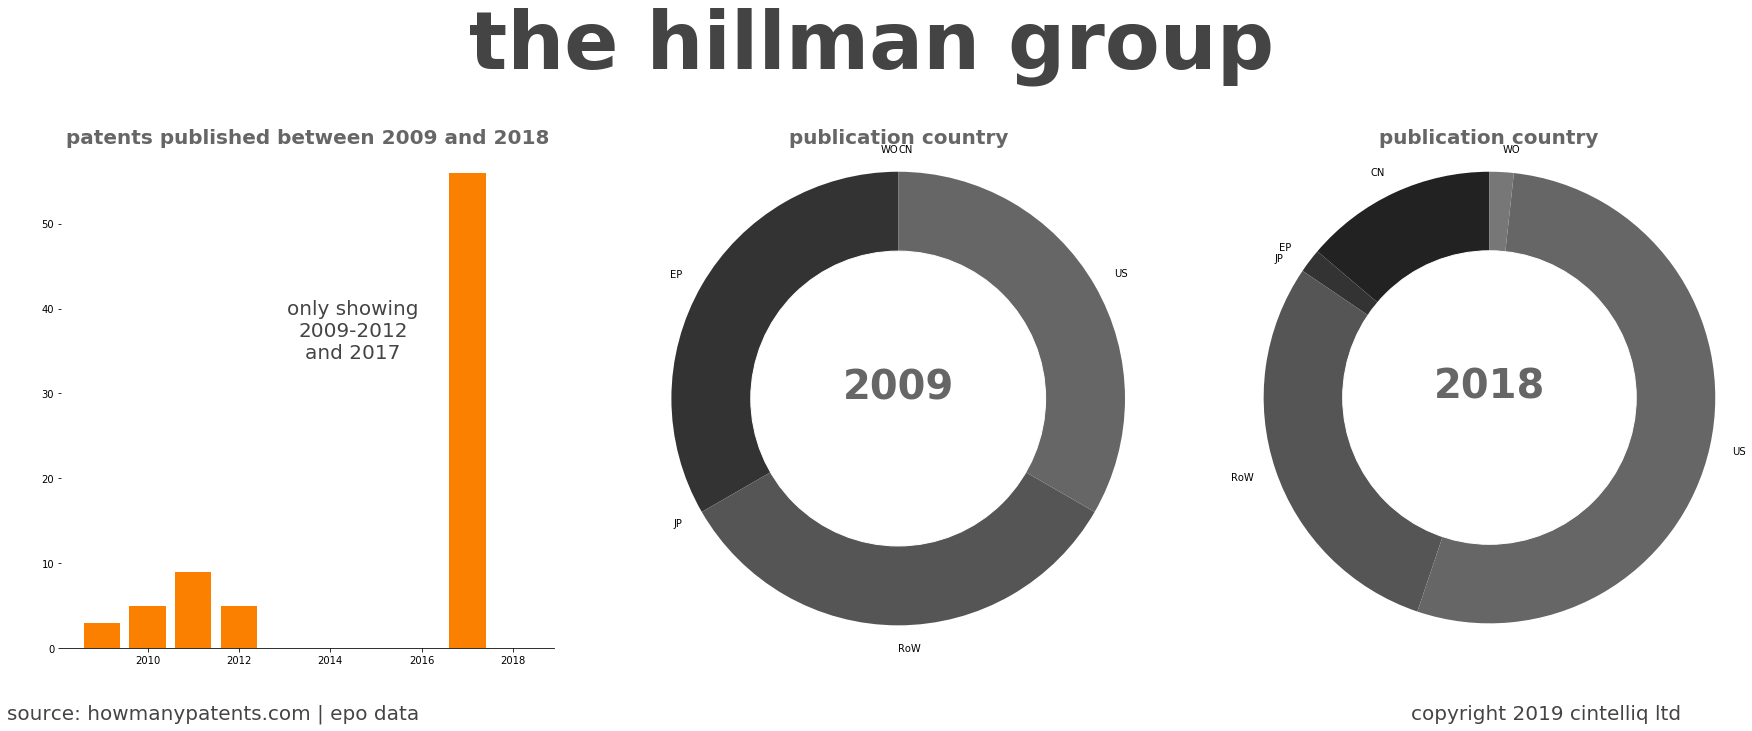 summary of patents for The Hillman Group